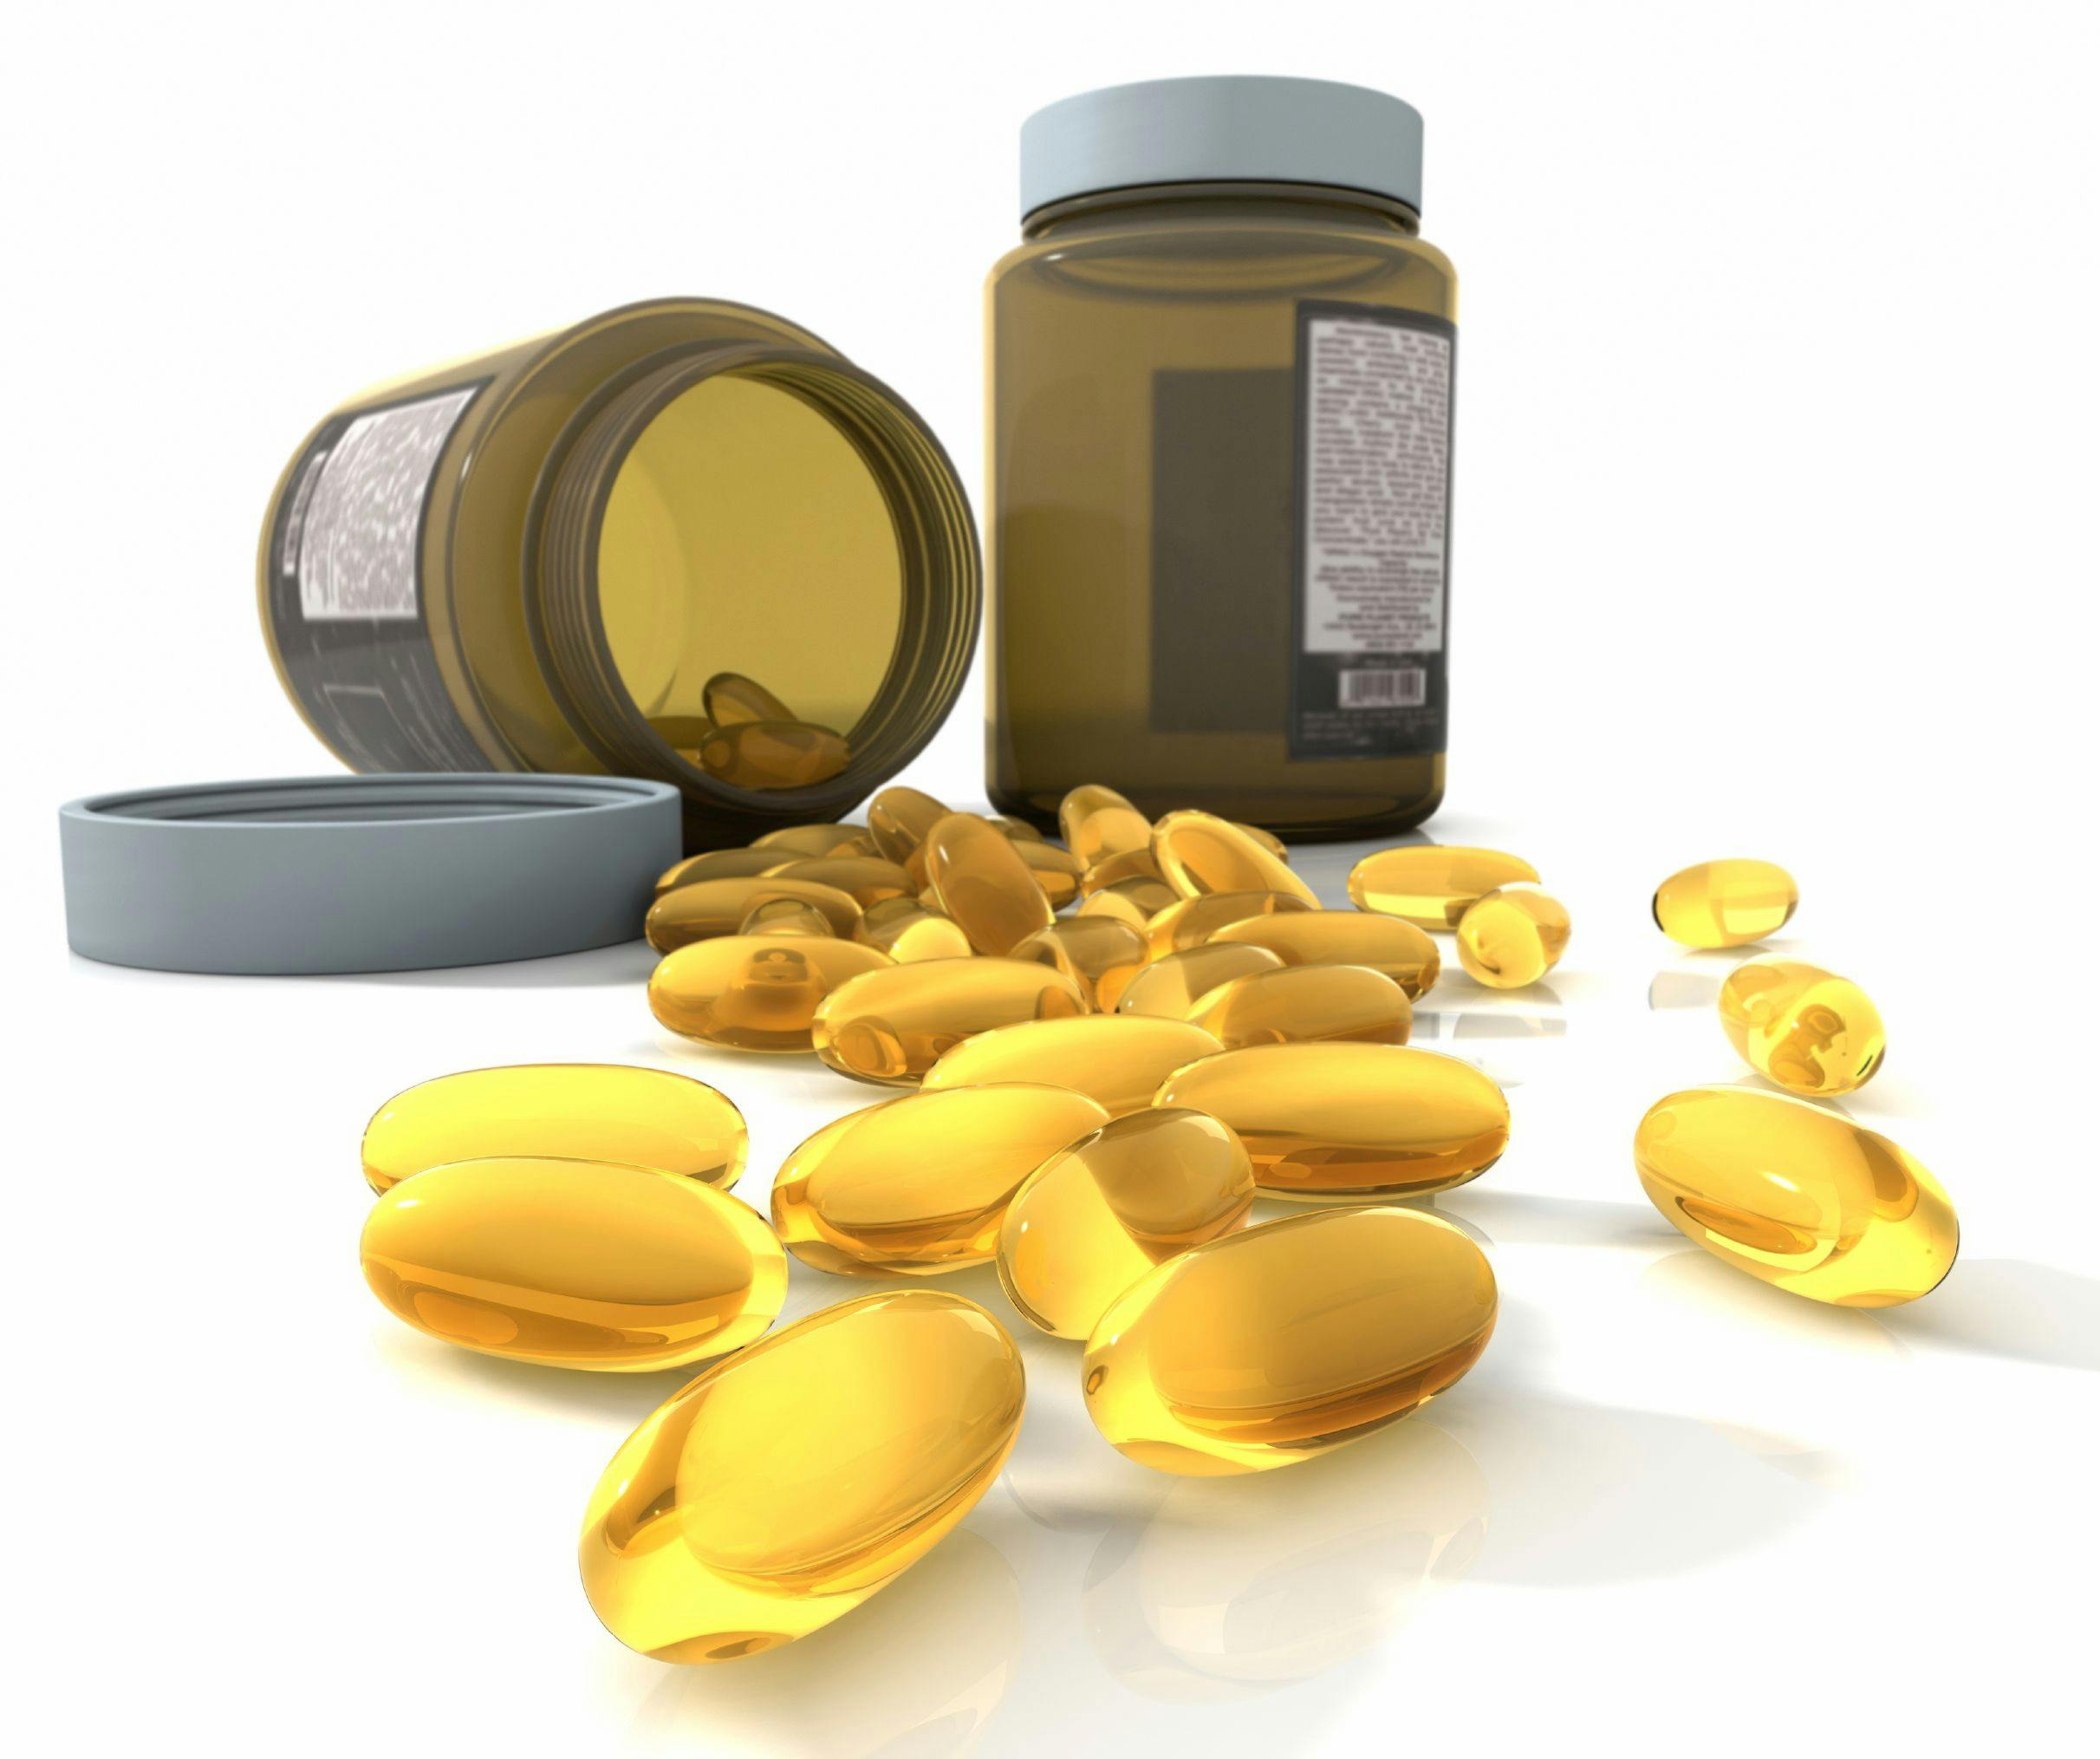 3 Grams of Omega-3 Fatty Acids Consumed Daily May Reduce Blood Pressure